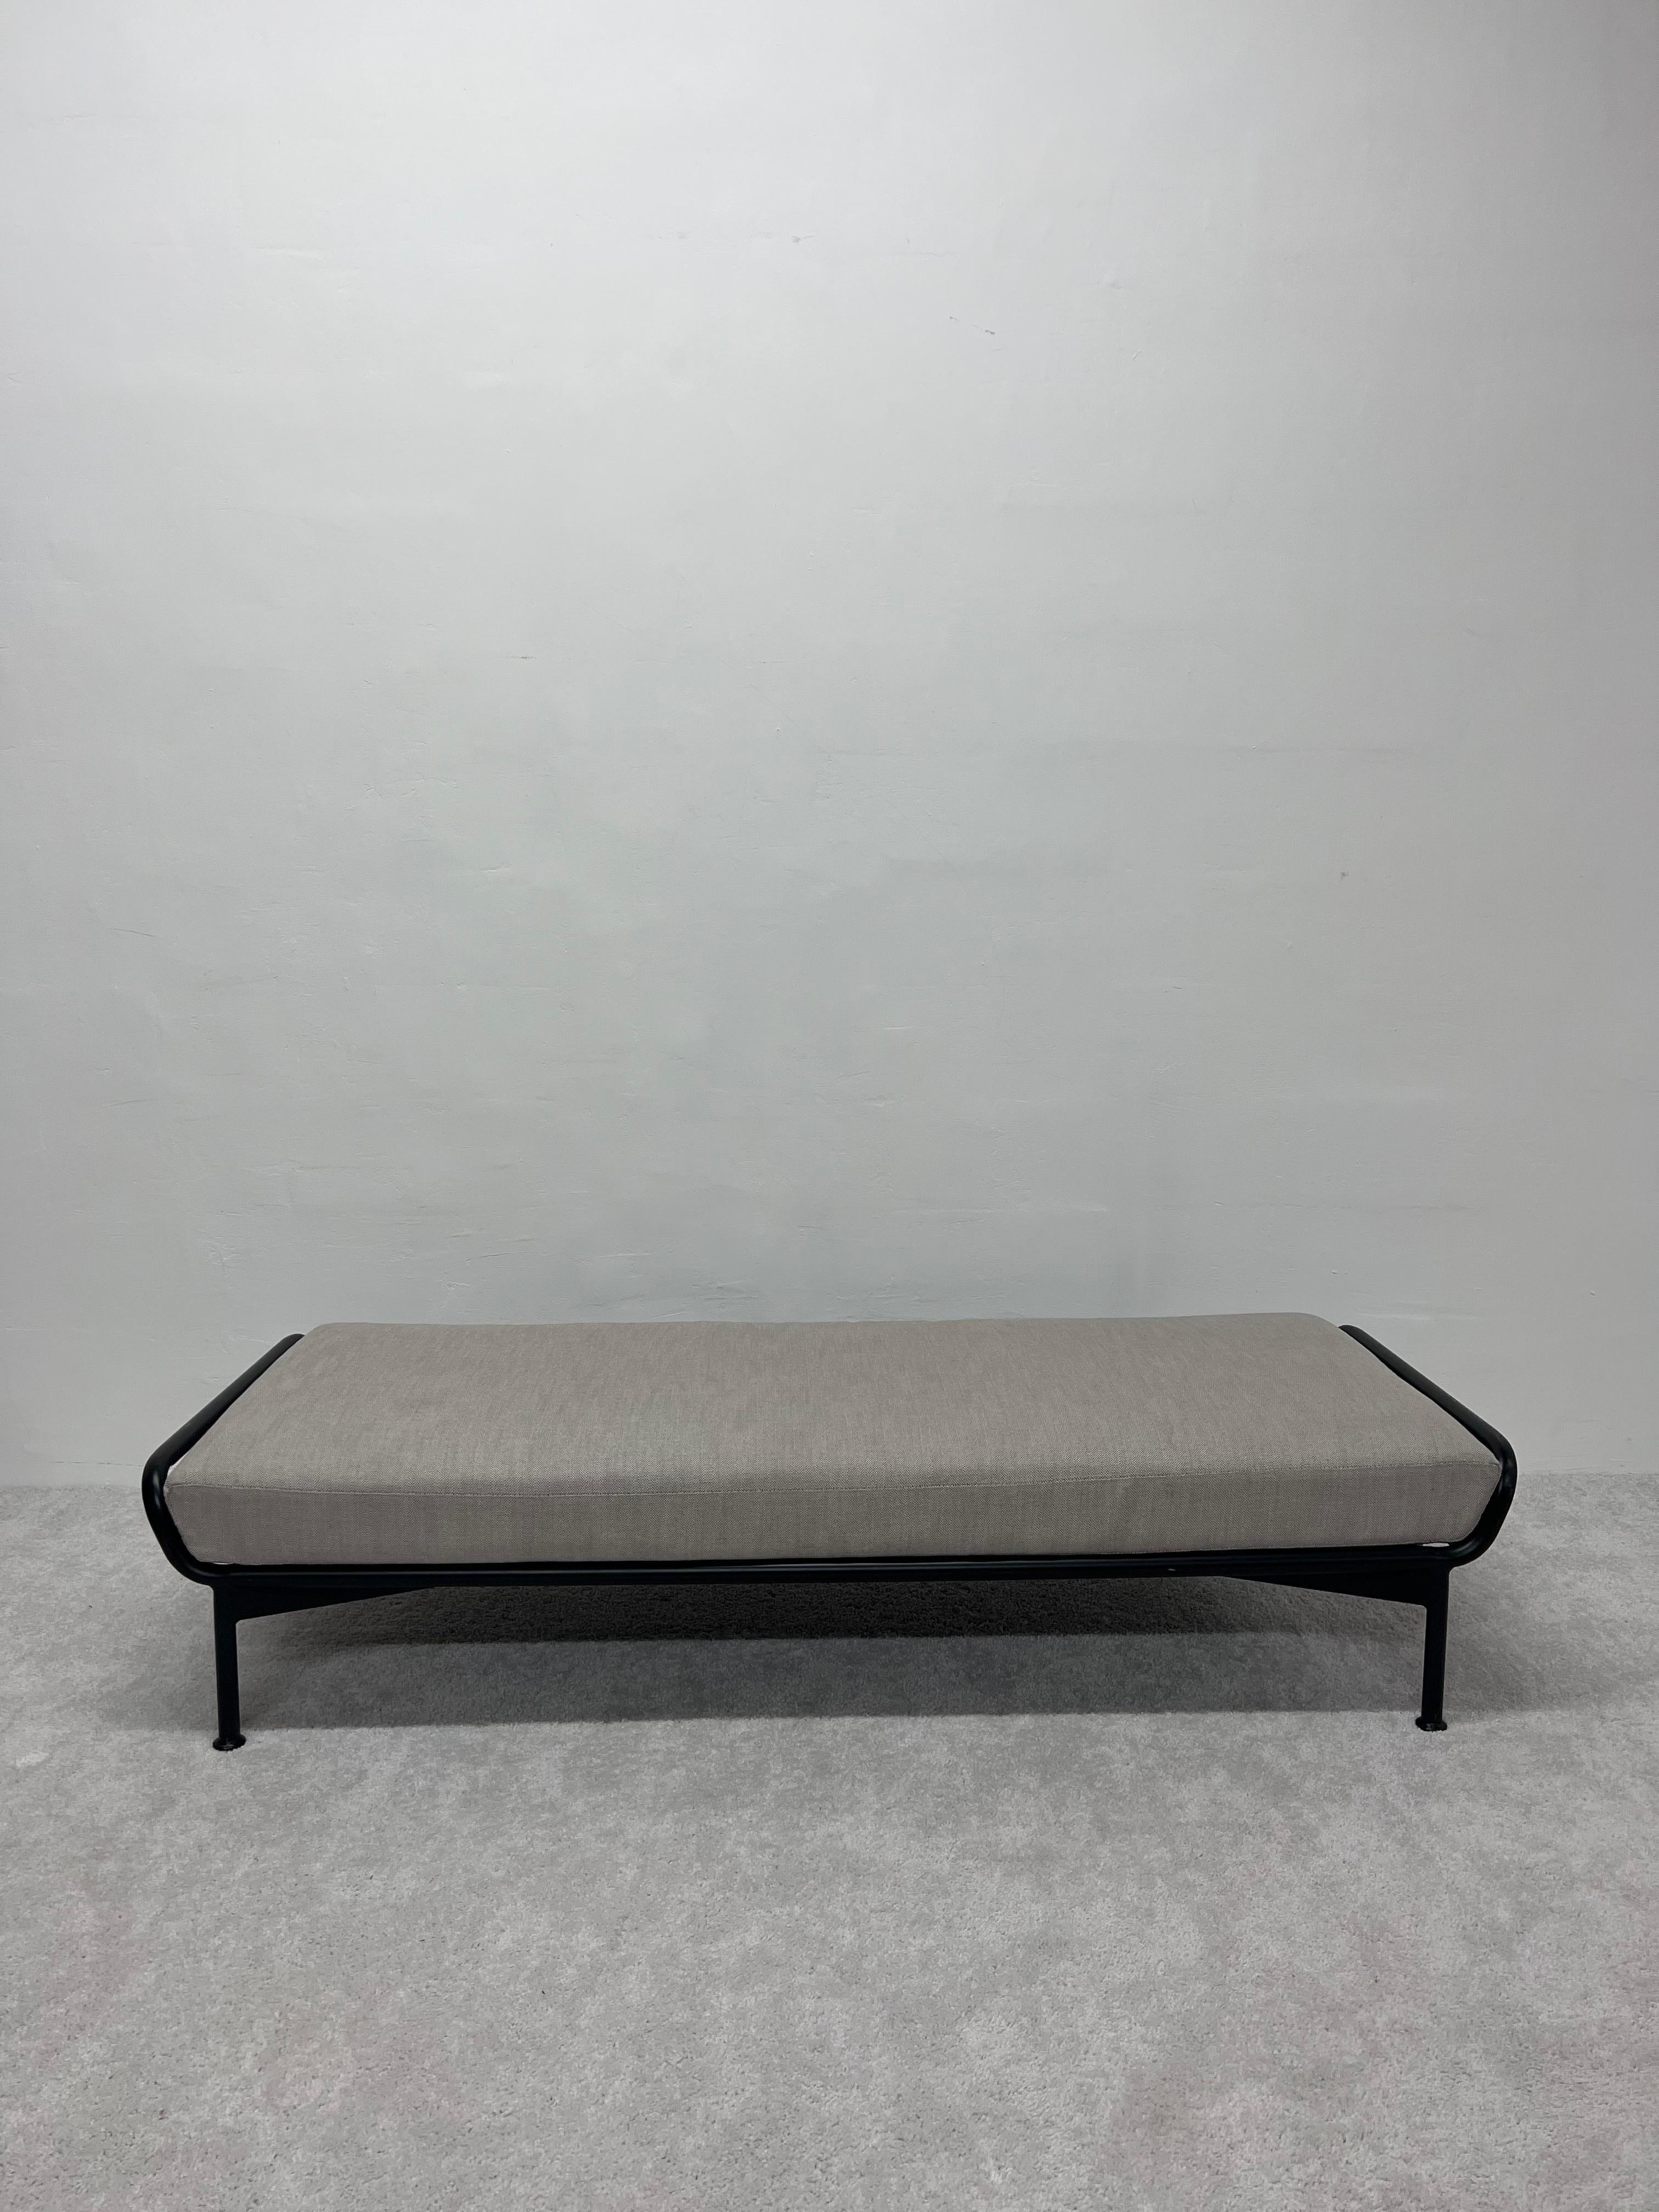 Contemporary John Caldwell Prevue Outdoor Daybed or Bench for Brown Jordan